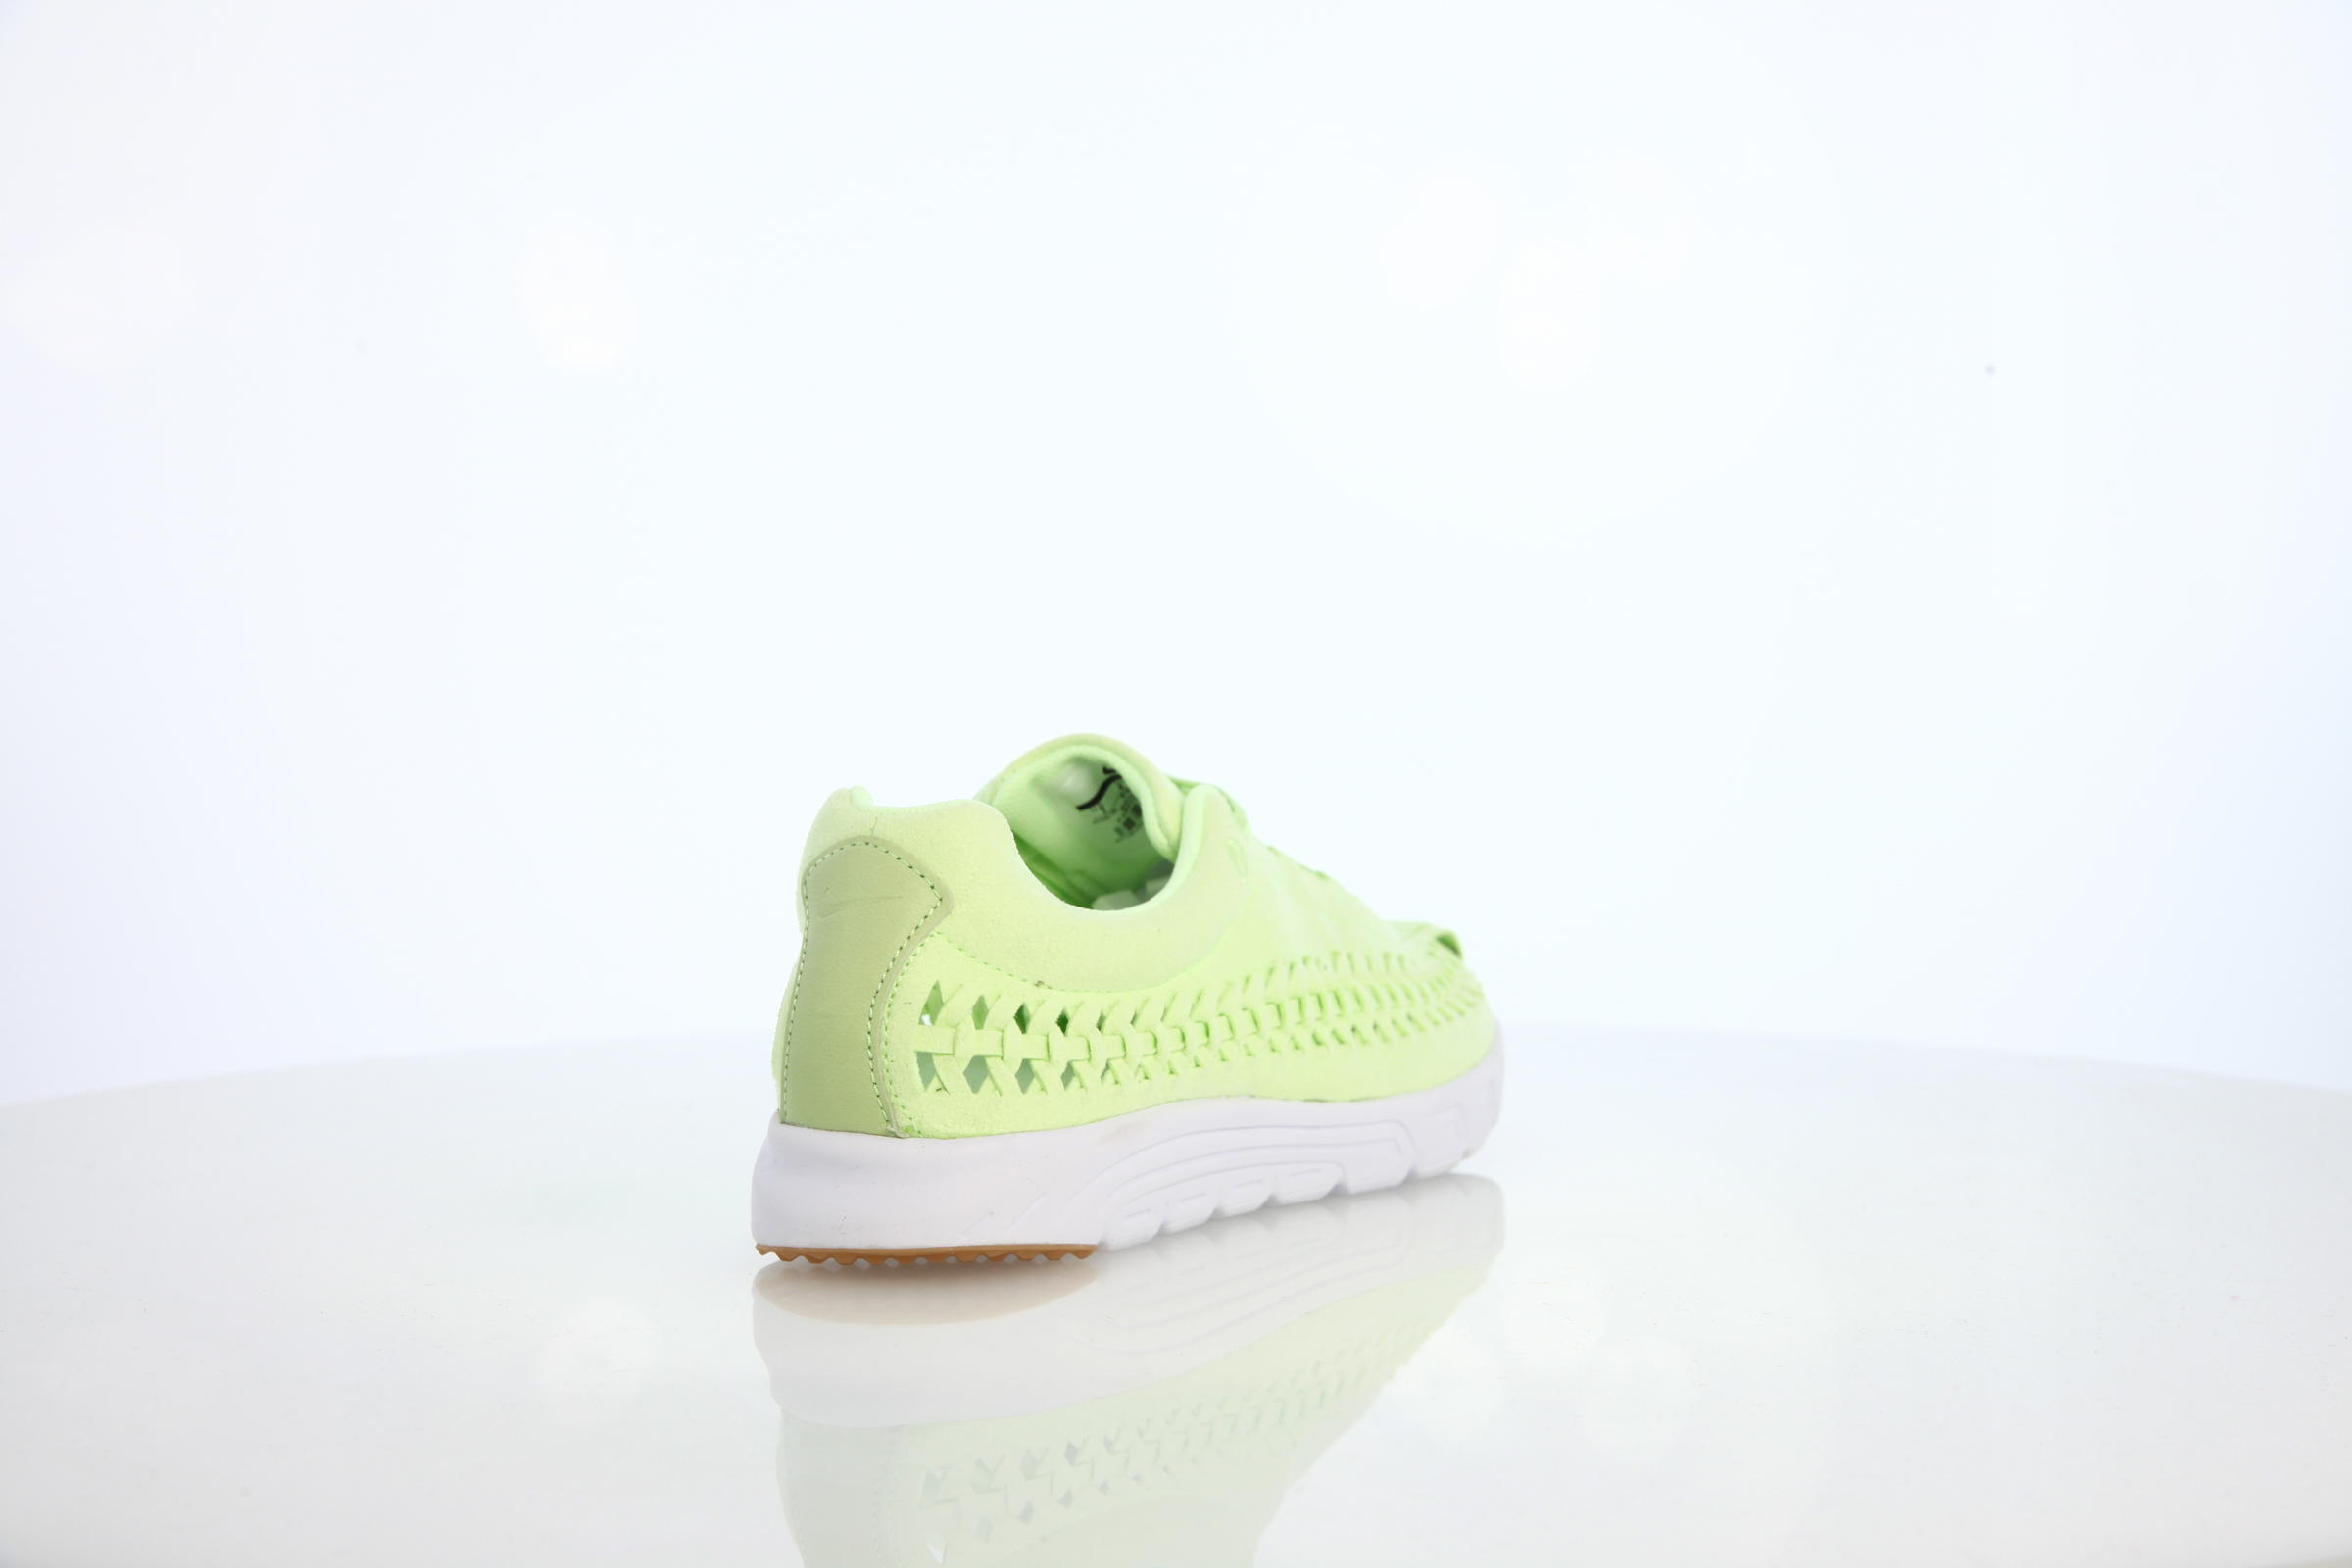 Nike Wmns Mayfly Woven QS Pastel Pack "Lt Liquid Lime"